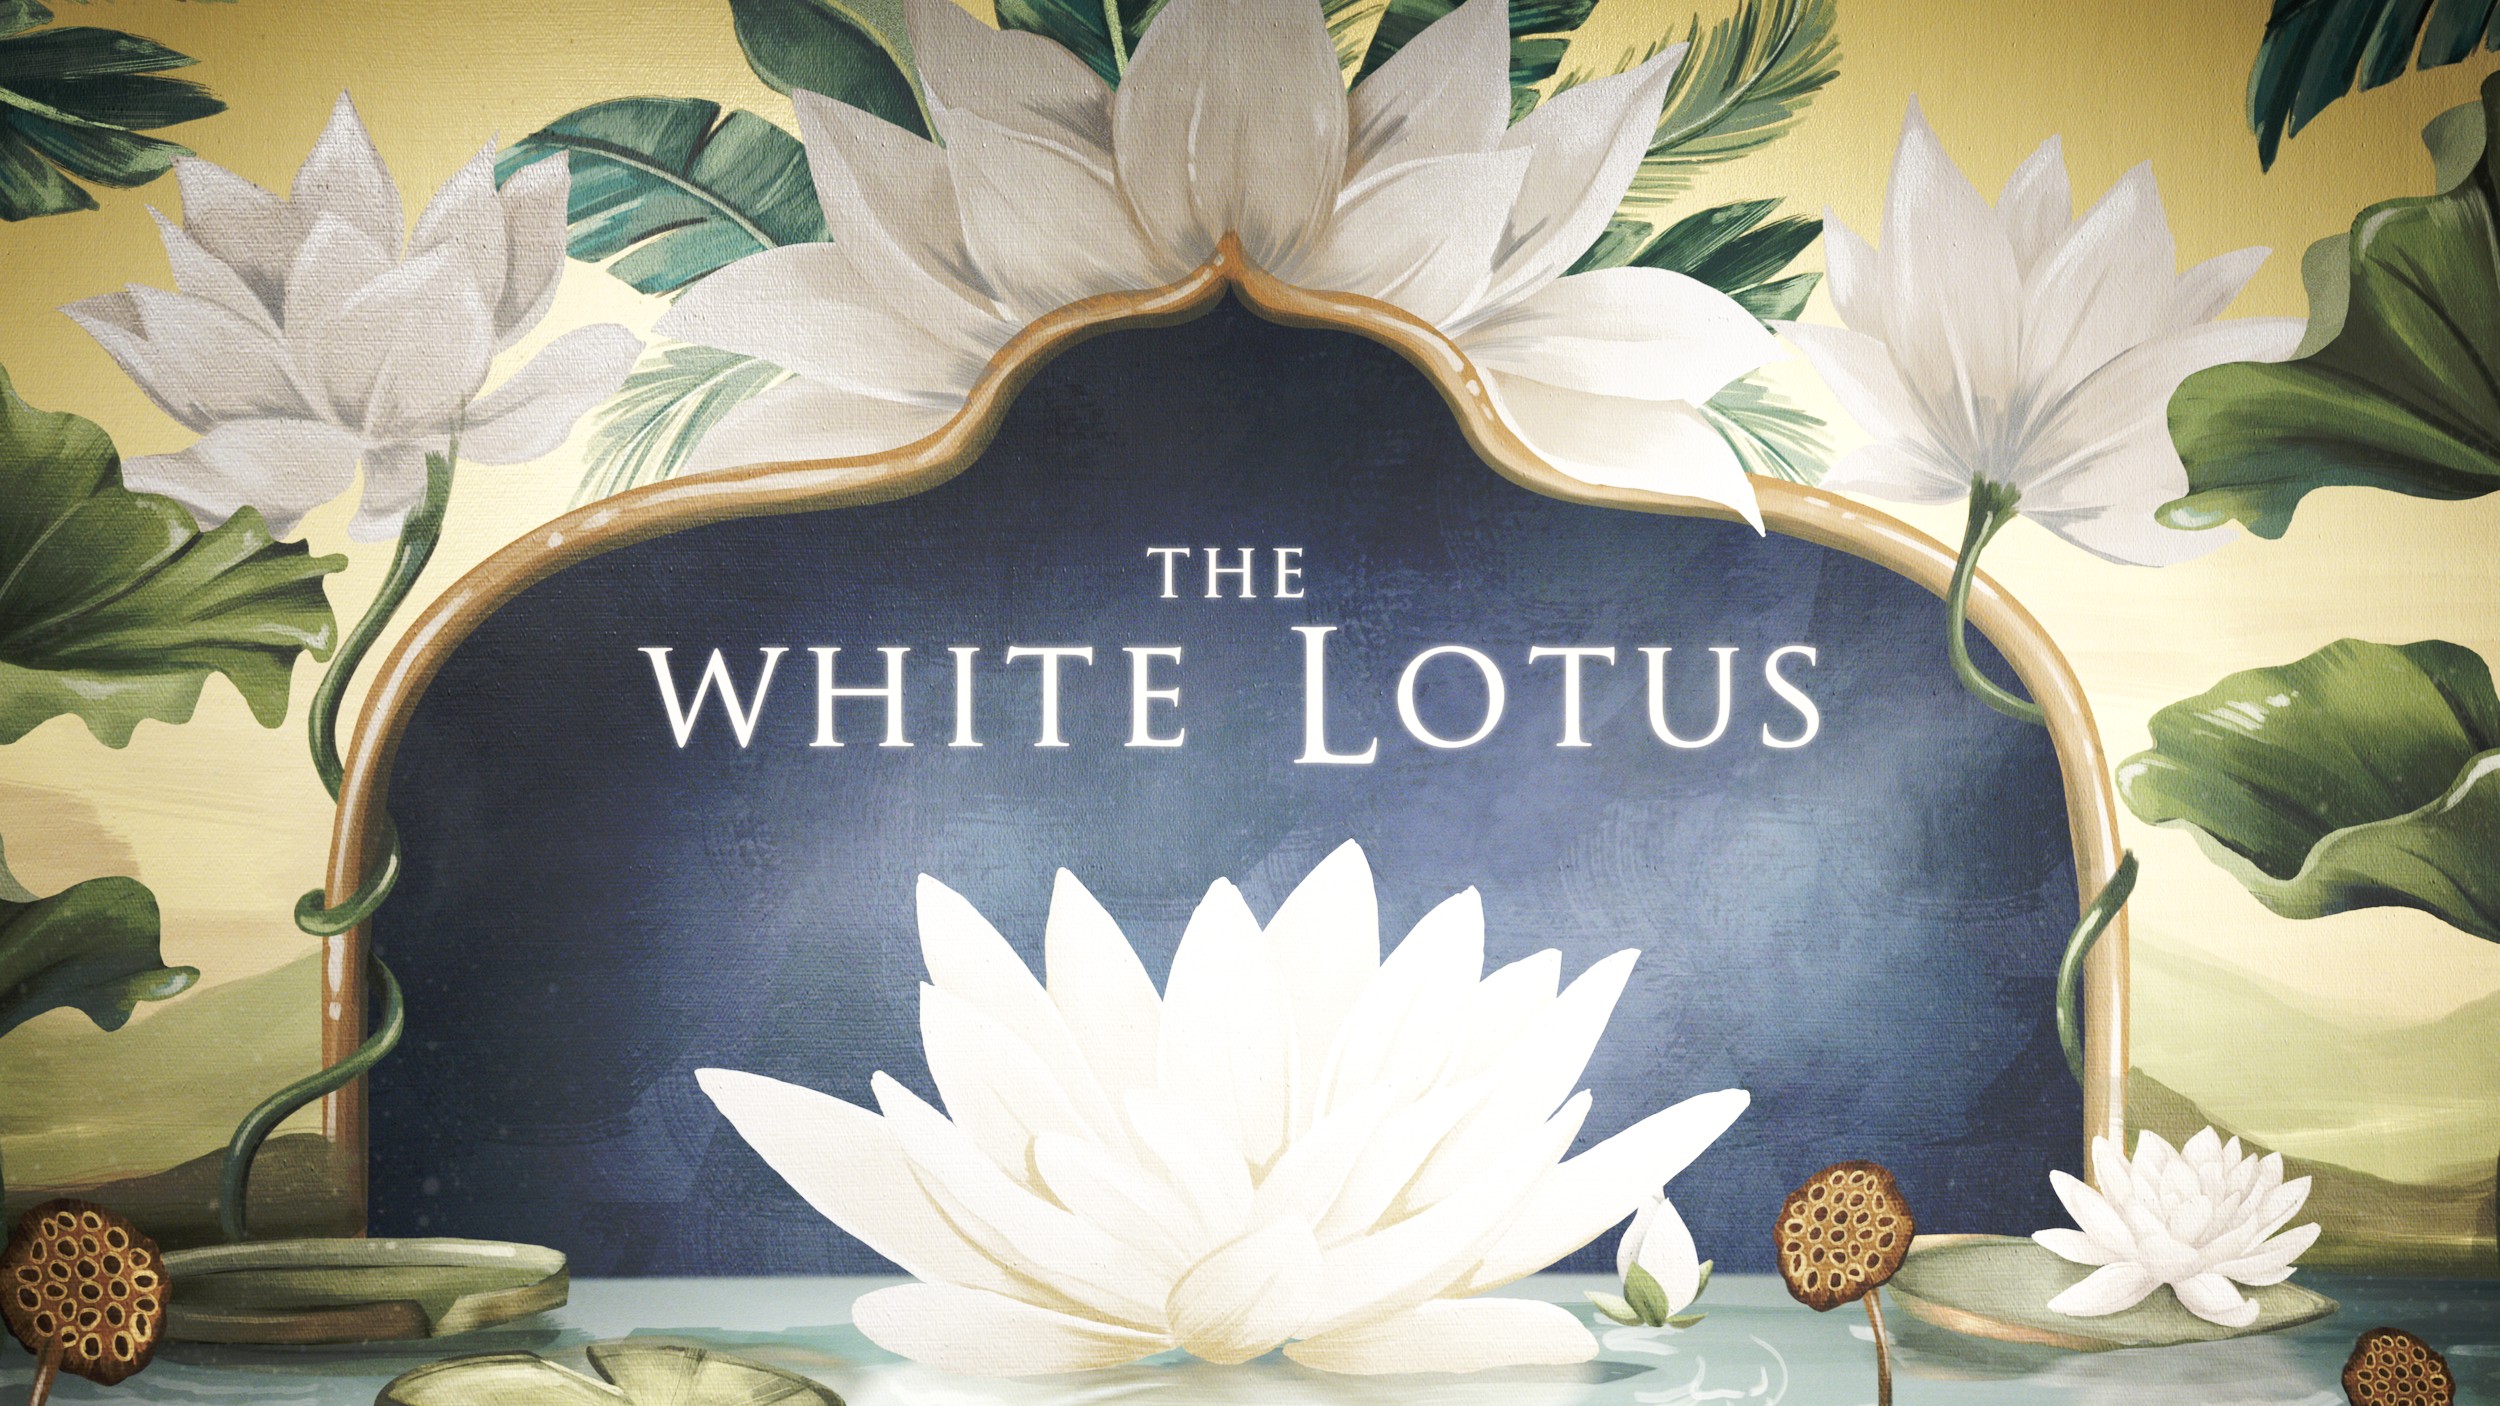 Jennifer Coolidge and Aubrey Plaza lead cast of The White Lotus as tensions  simmer in new trailer